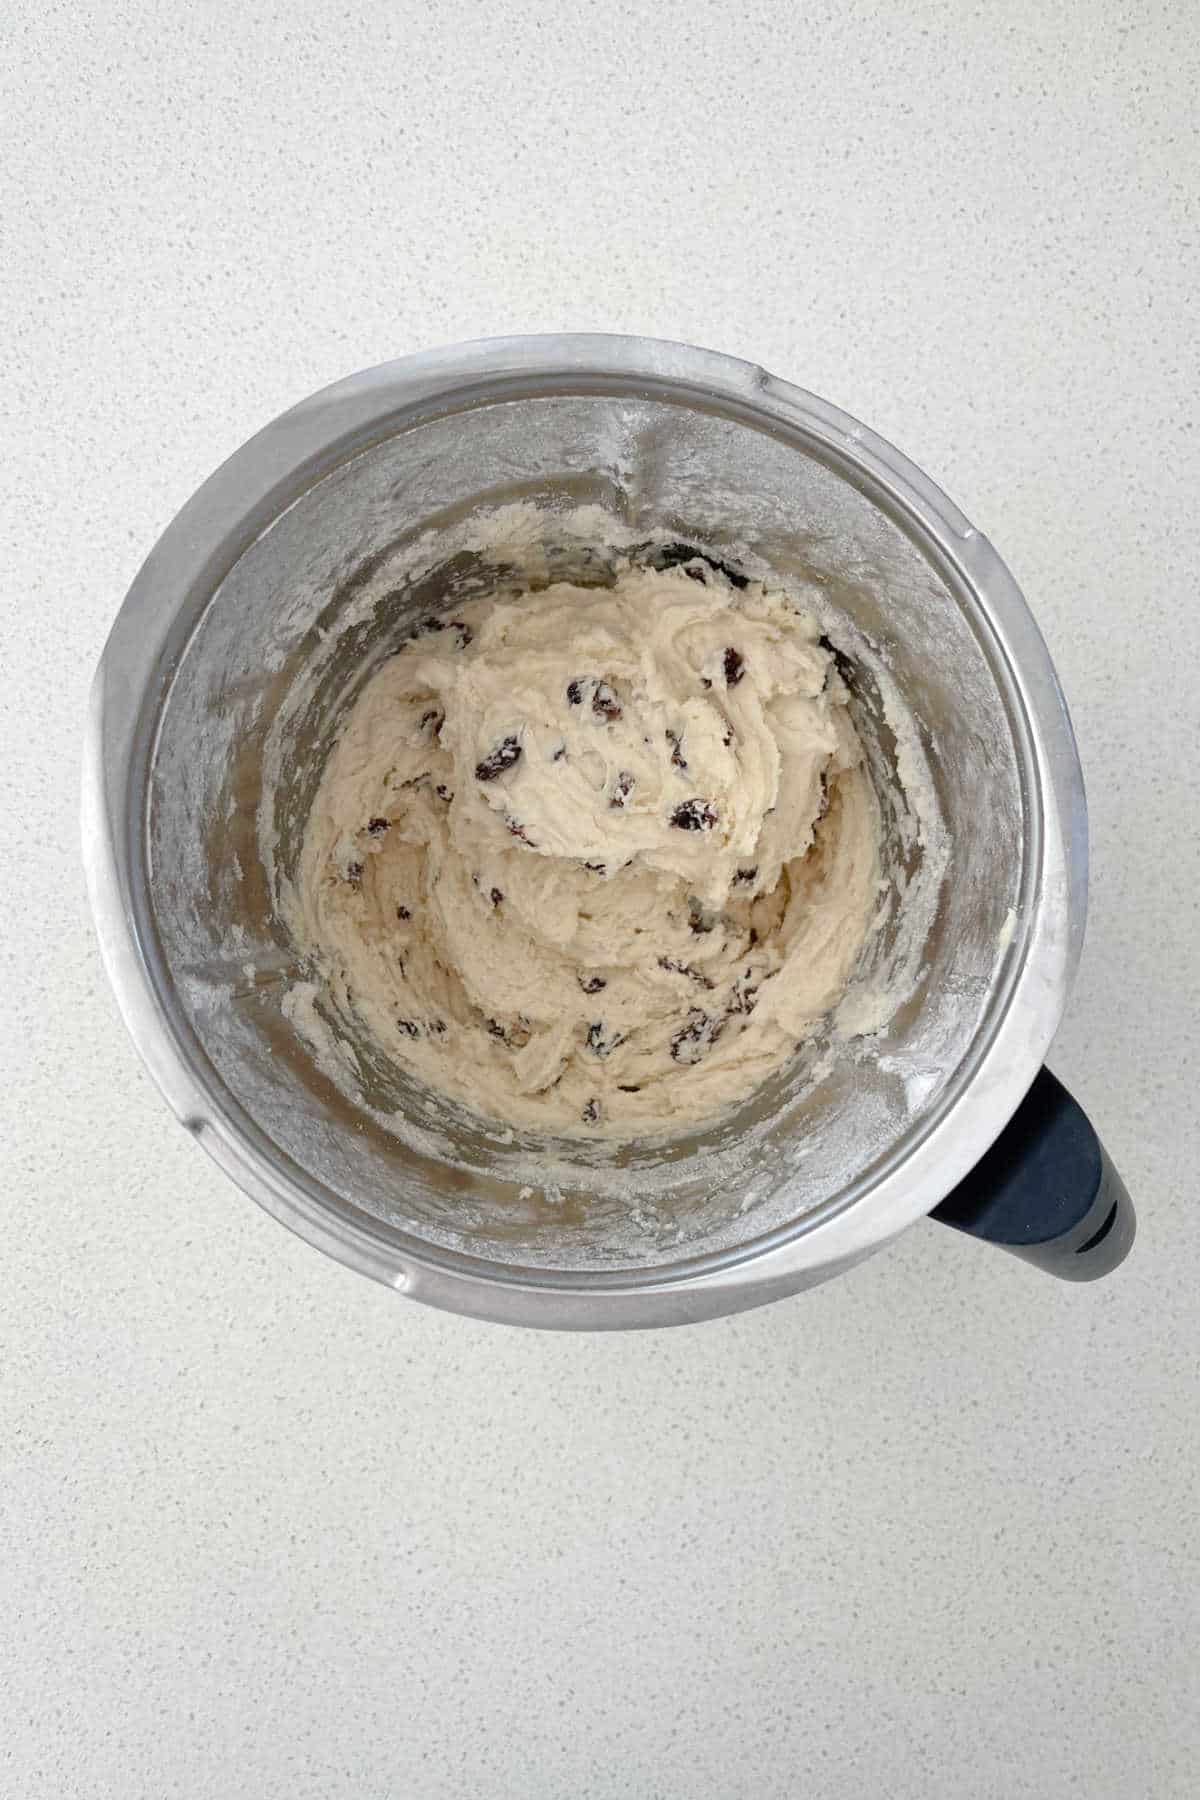 Sultana Scone mixture in a thermomix bowl.